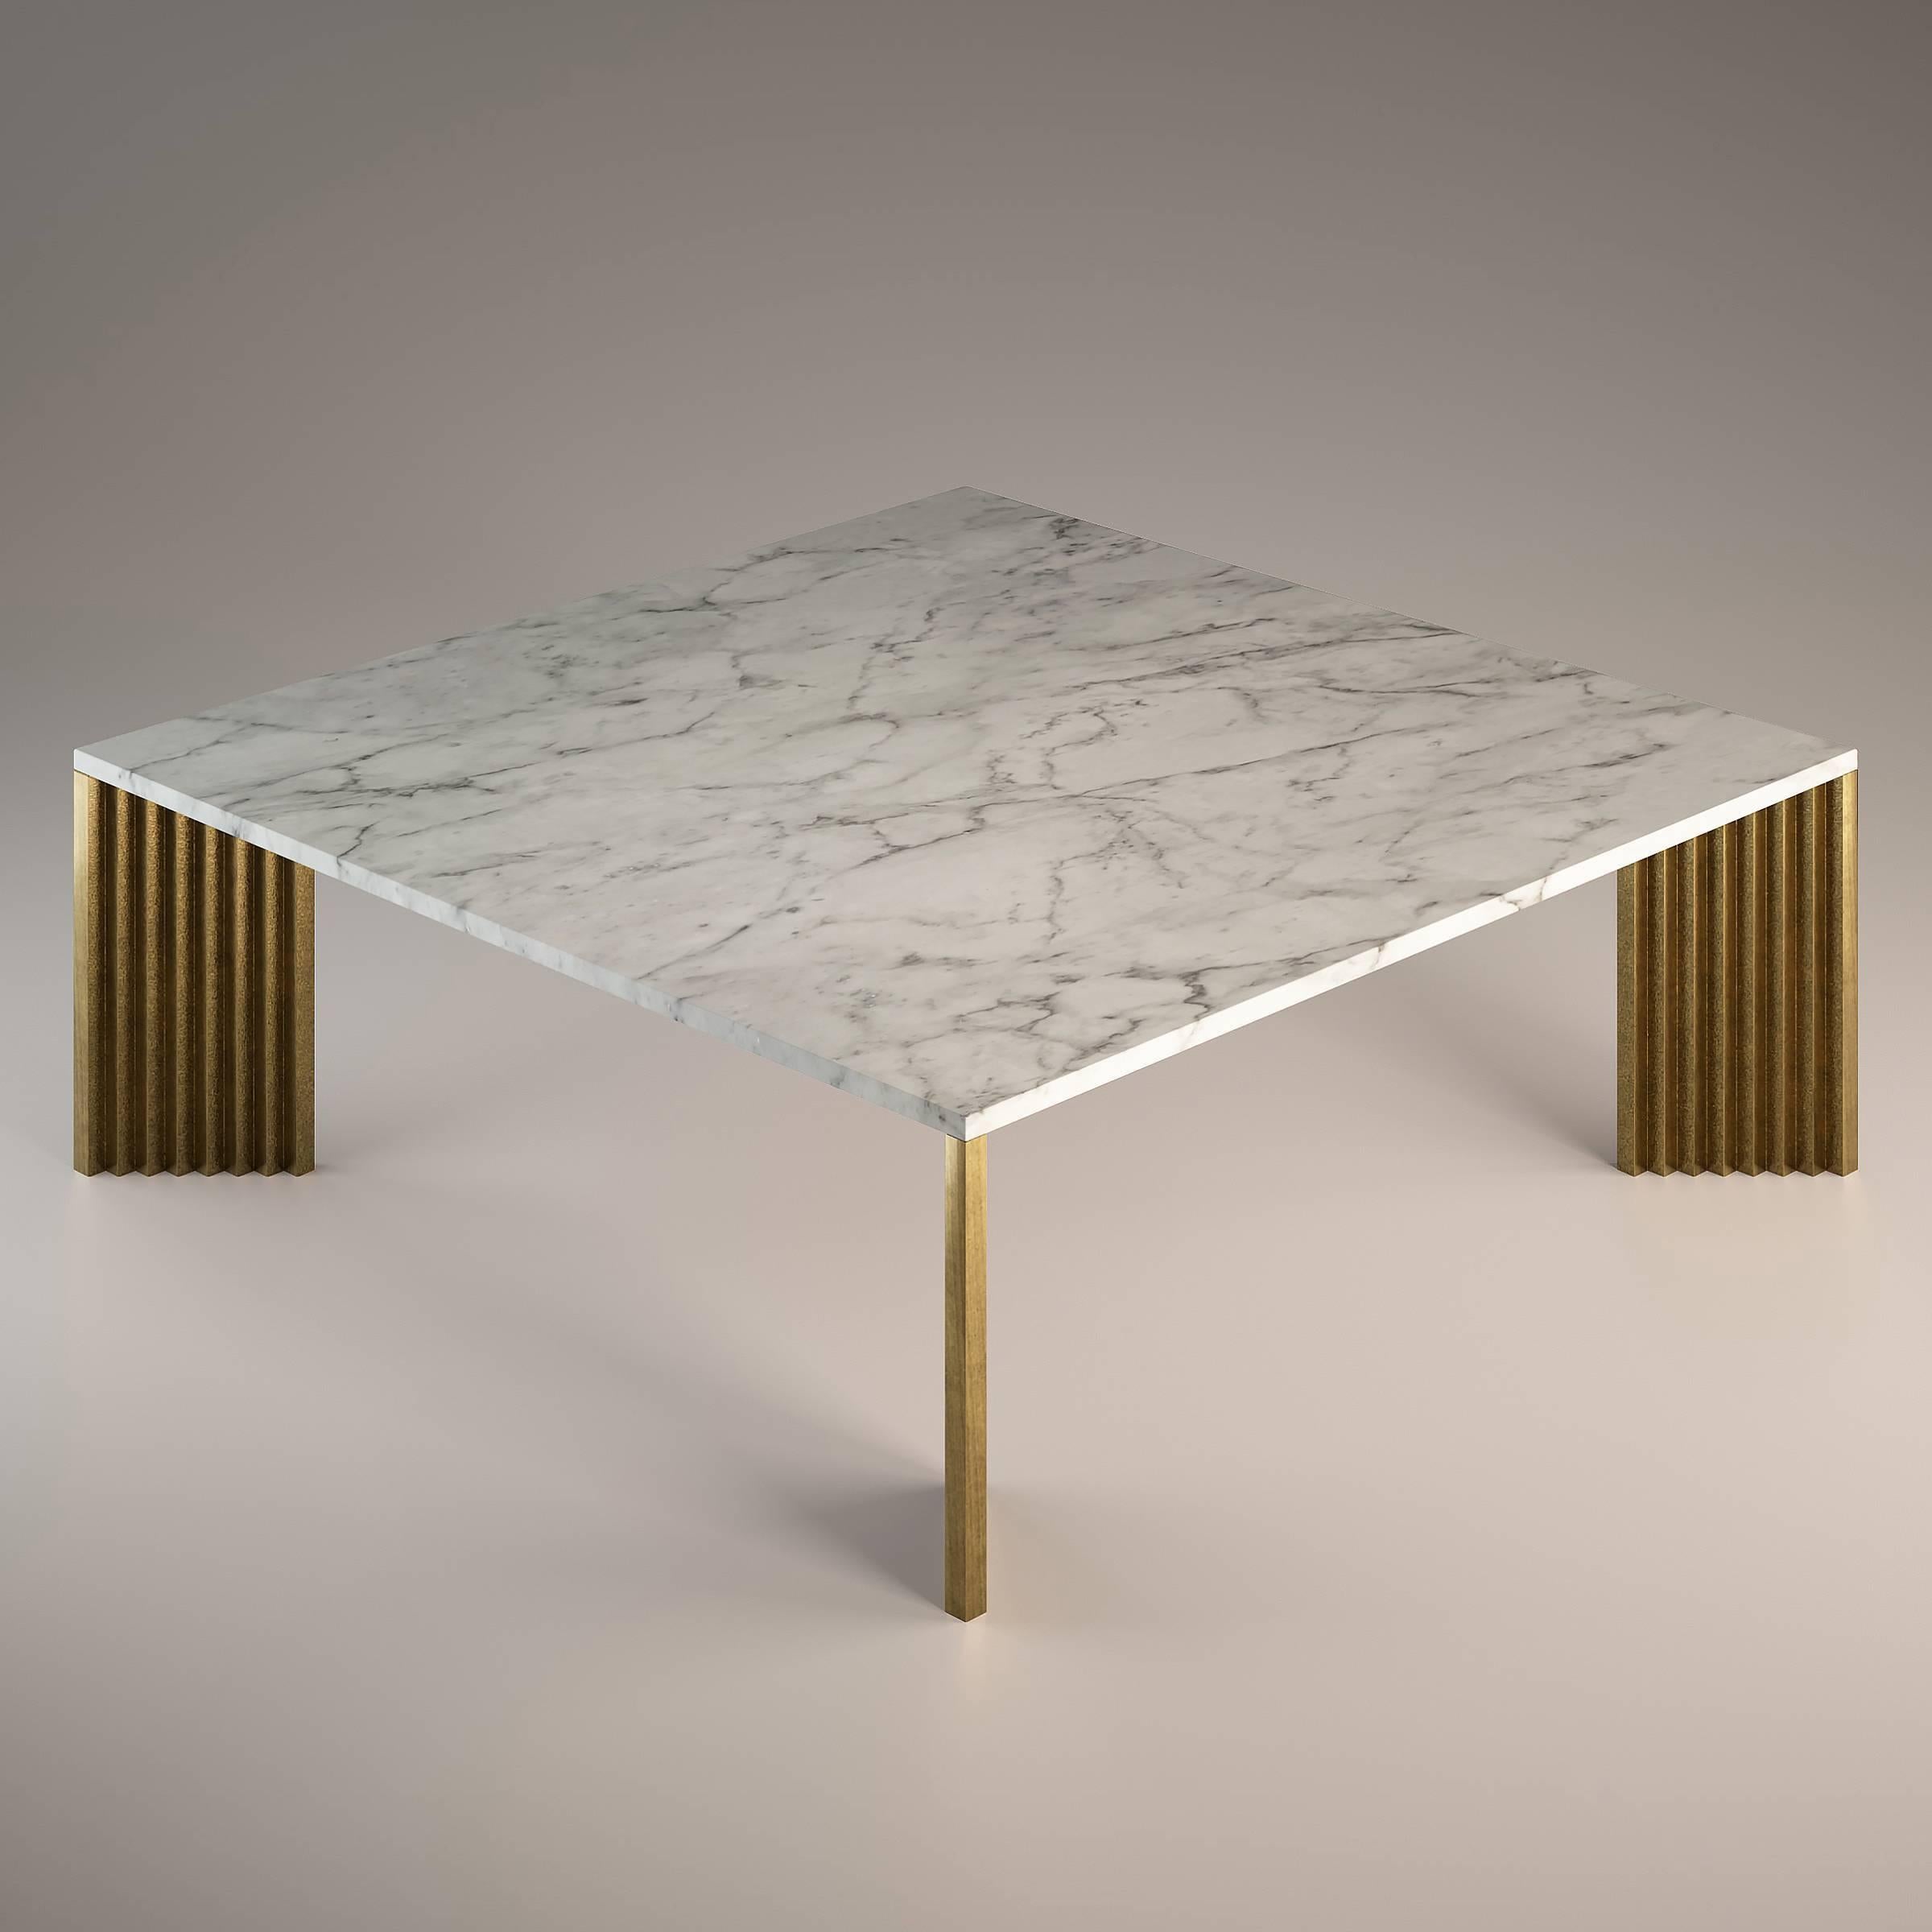 The cast brass legs, with their stepped profiles and diagonal position, appear differently from each viewing angle: sometimes slender, then massive, but also polished and at other times rough.

The top is in white carrara, a marble that is